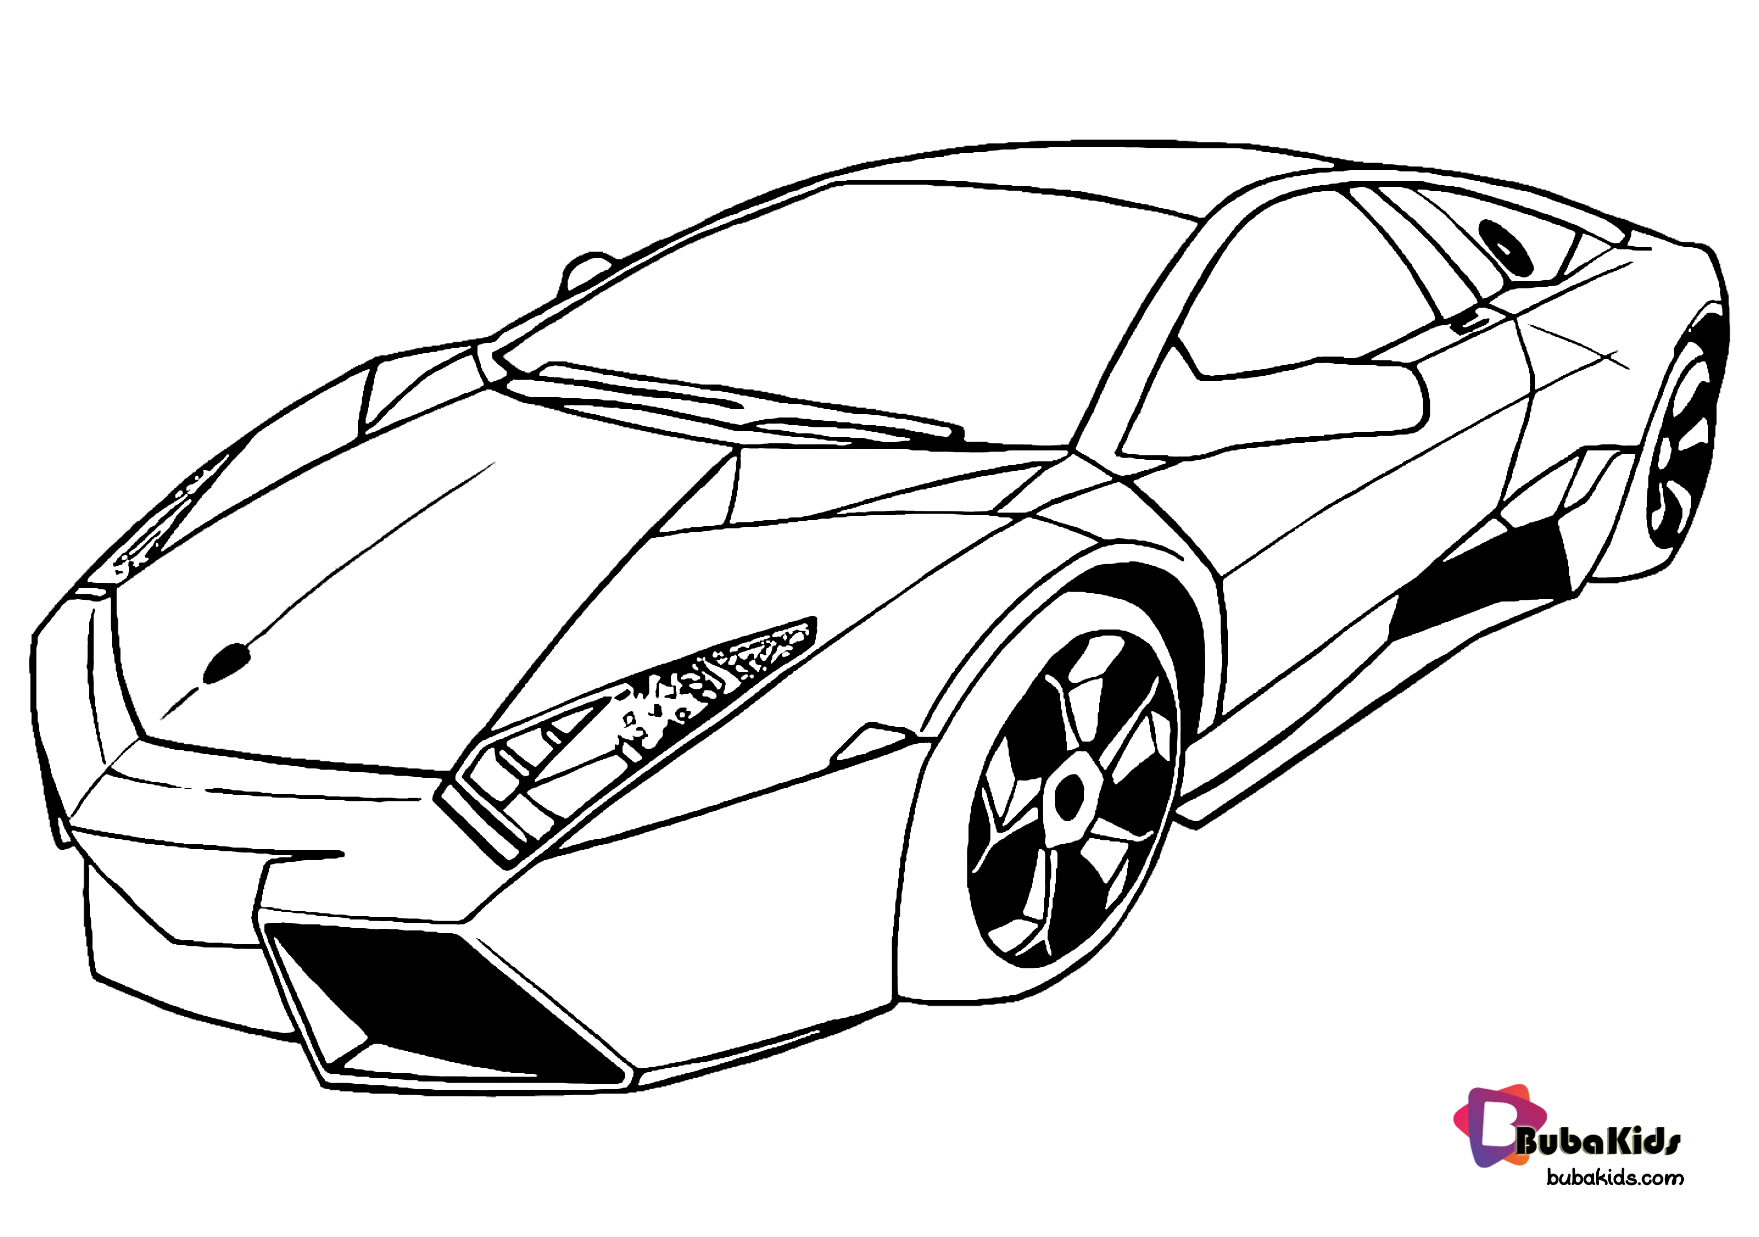 Free download and printable super car coloring page in 2020 | Cars coloring  pages, Coloring pages, Cartoon coloring pages